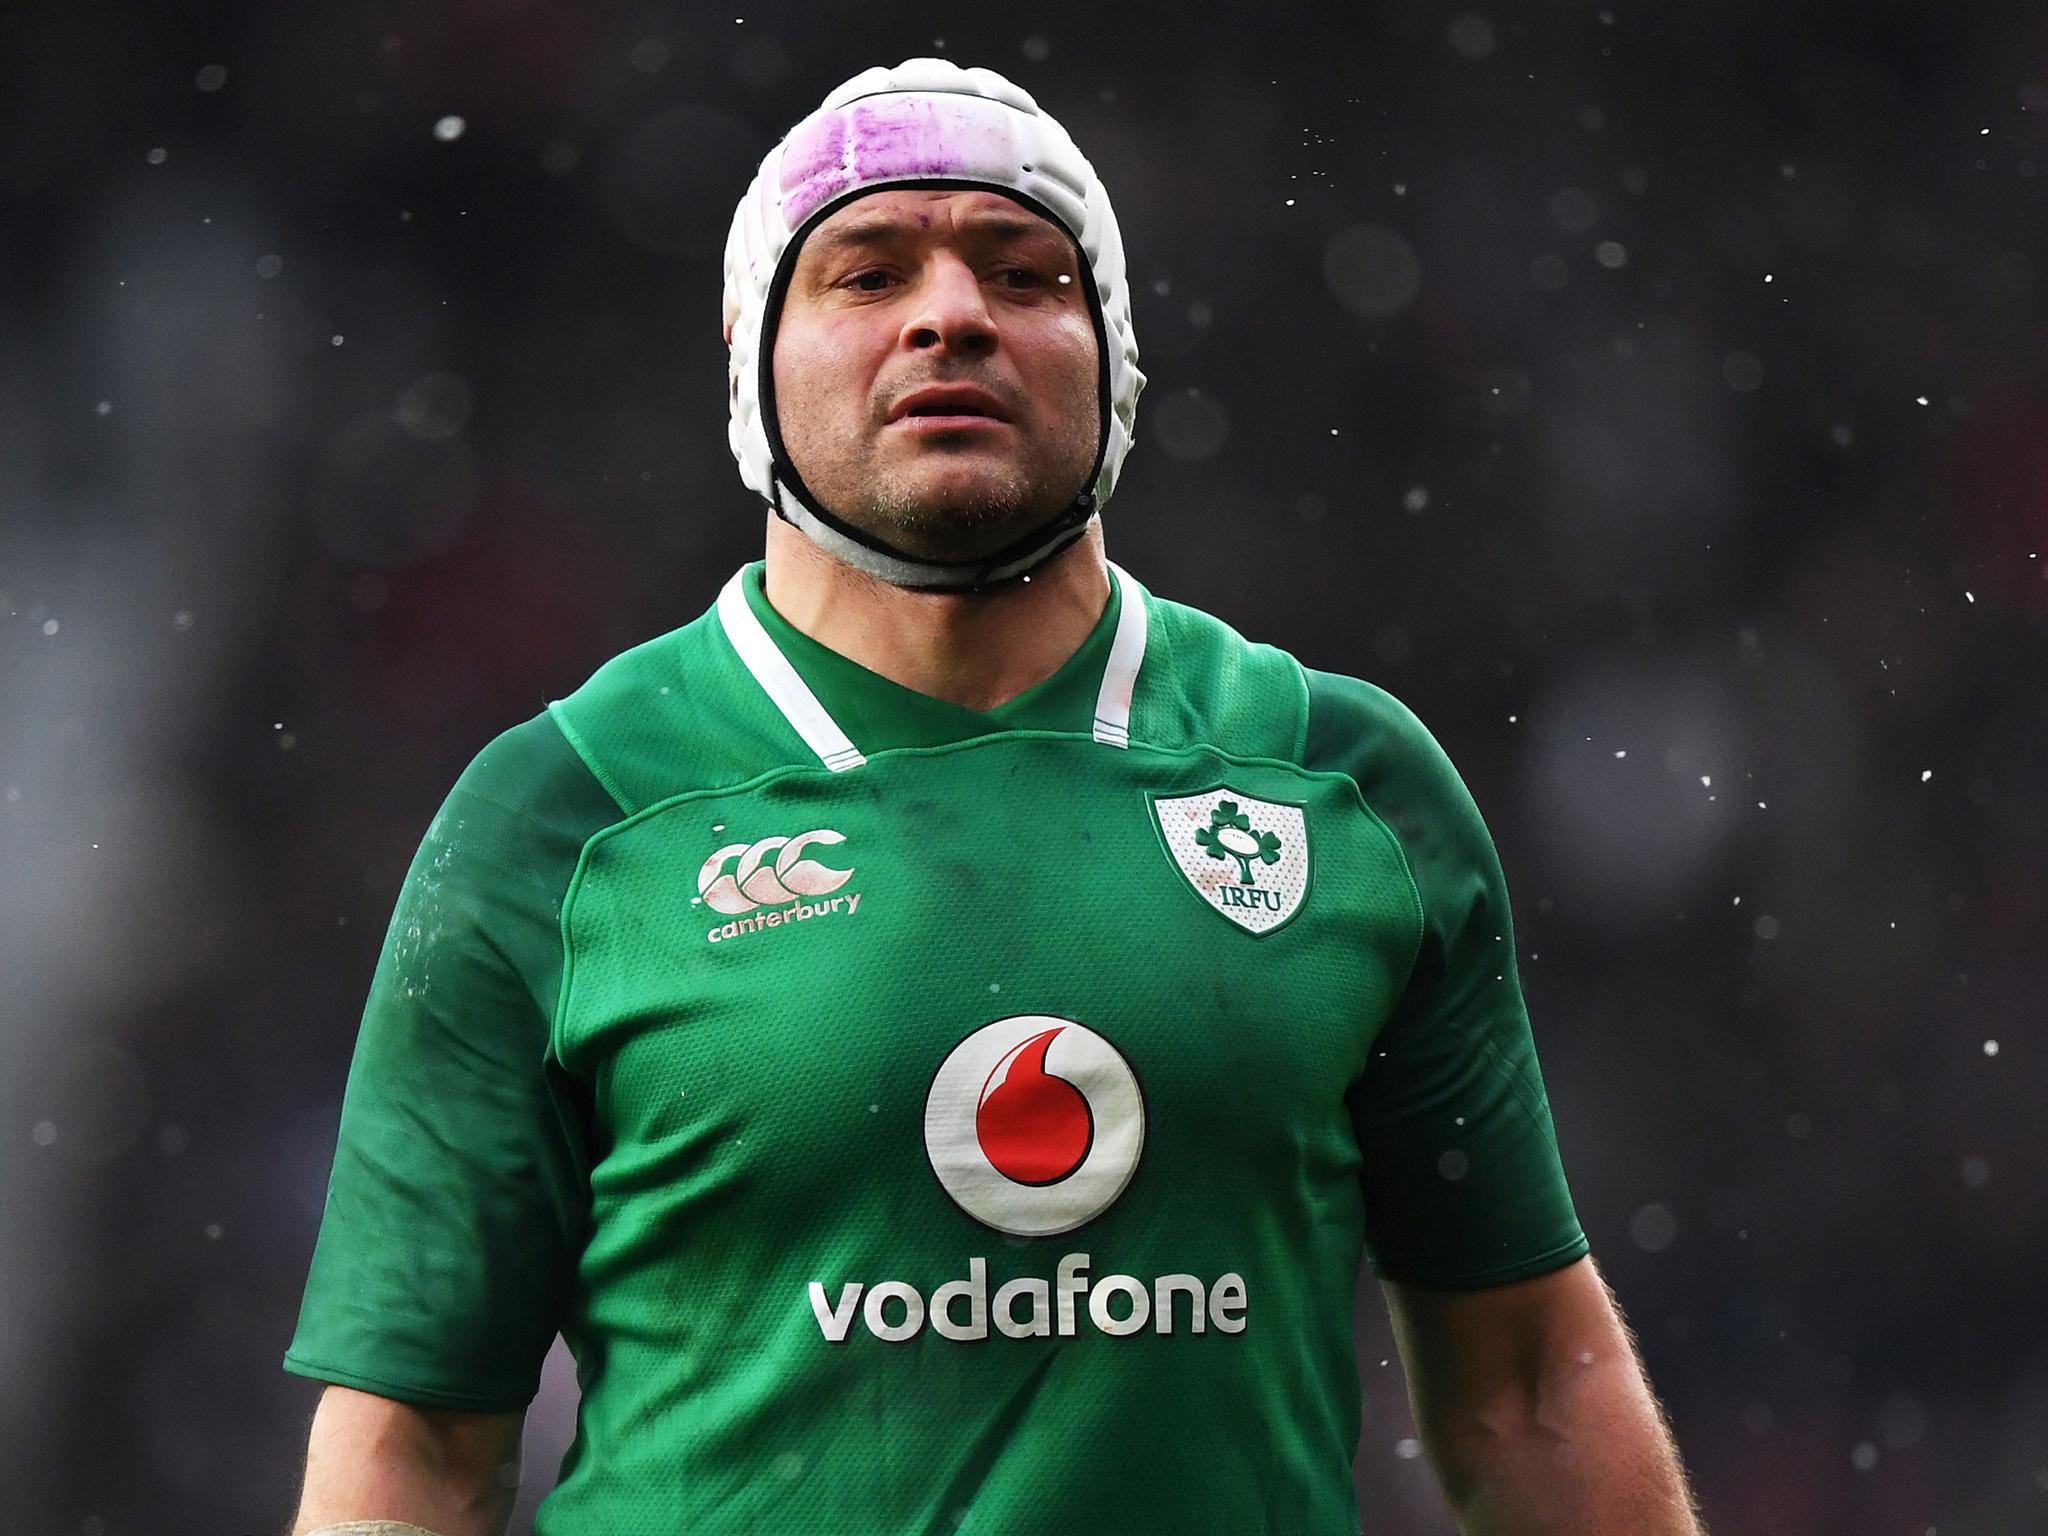 Best will continue to play for Ireland and Ulster until the end of 2019